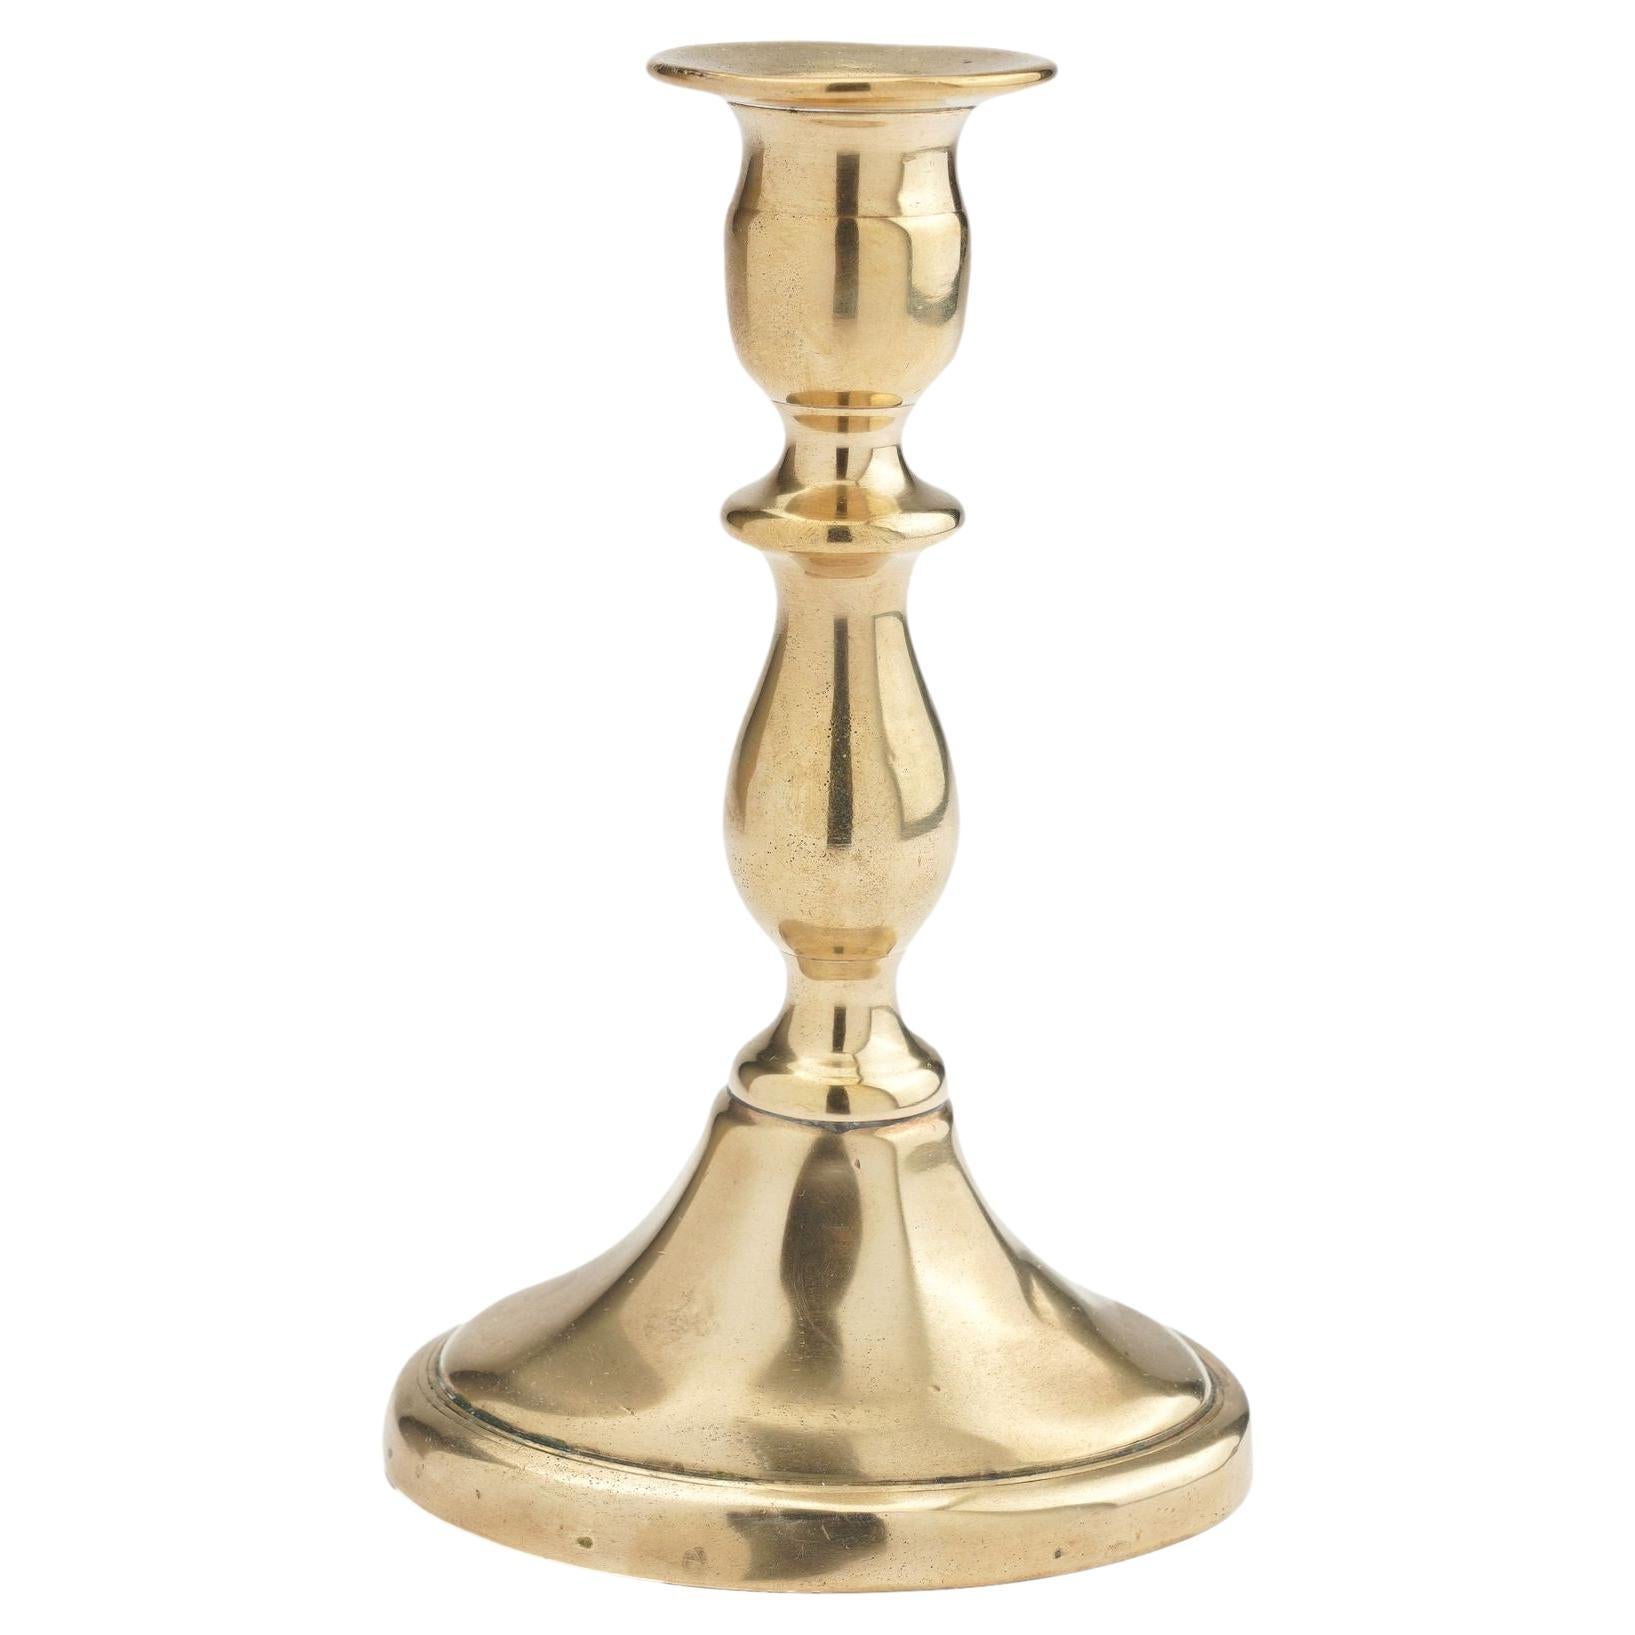 English cast brass oval base candlestick by William A. Harrison, 1791-1818 For Sale